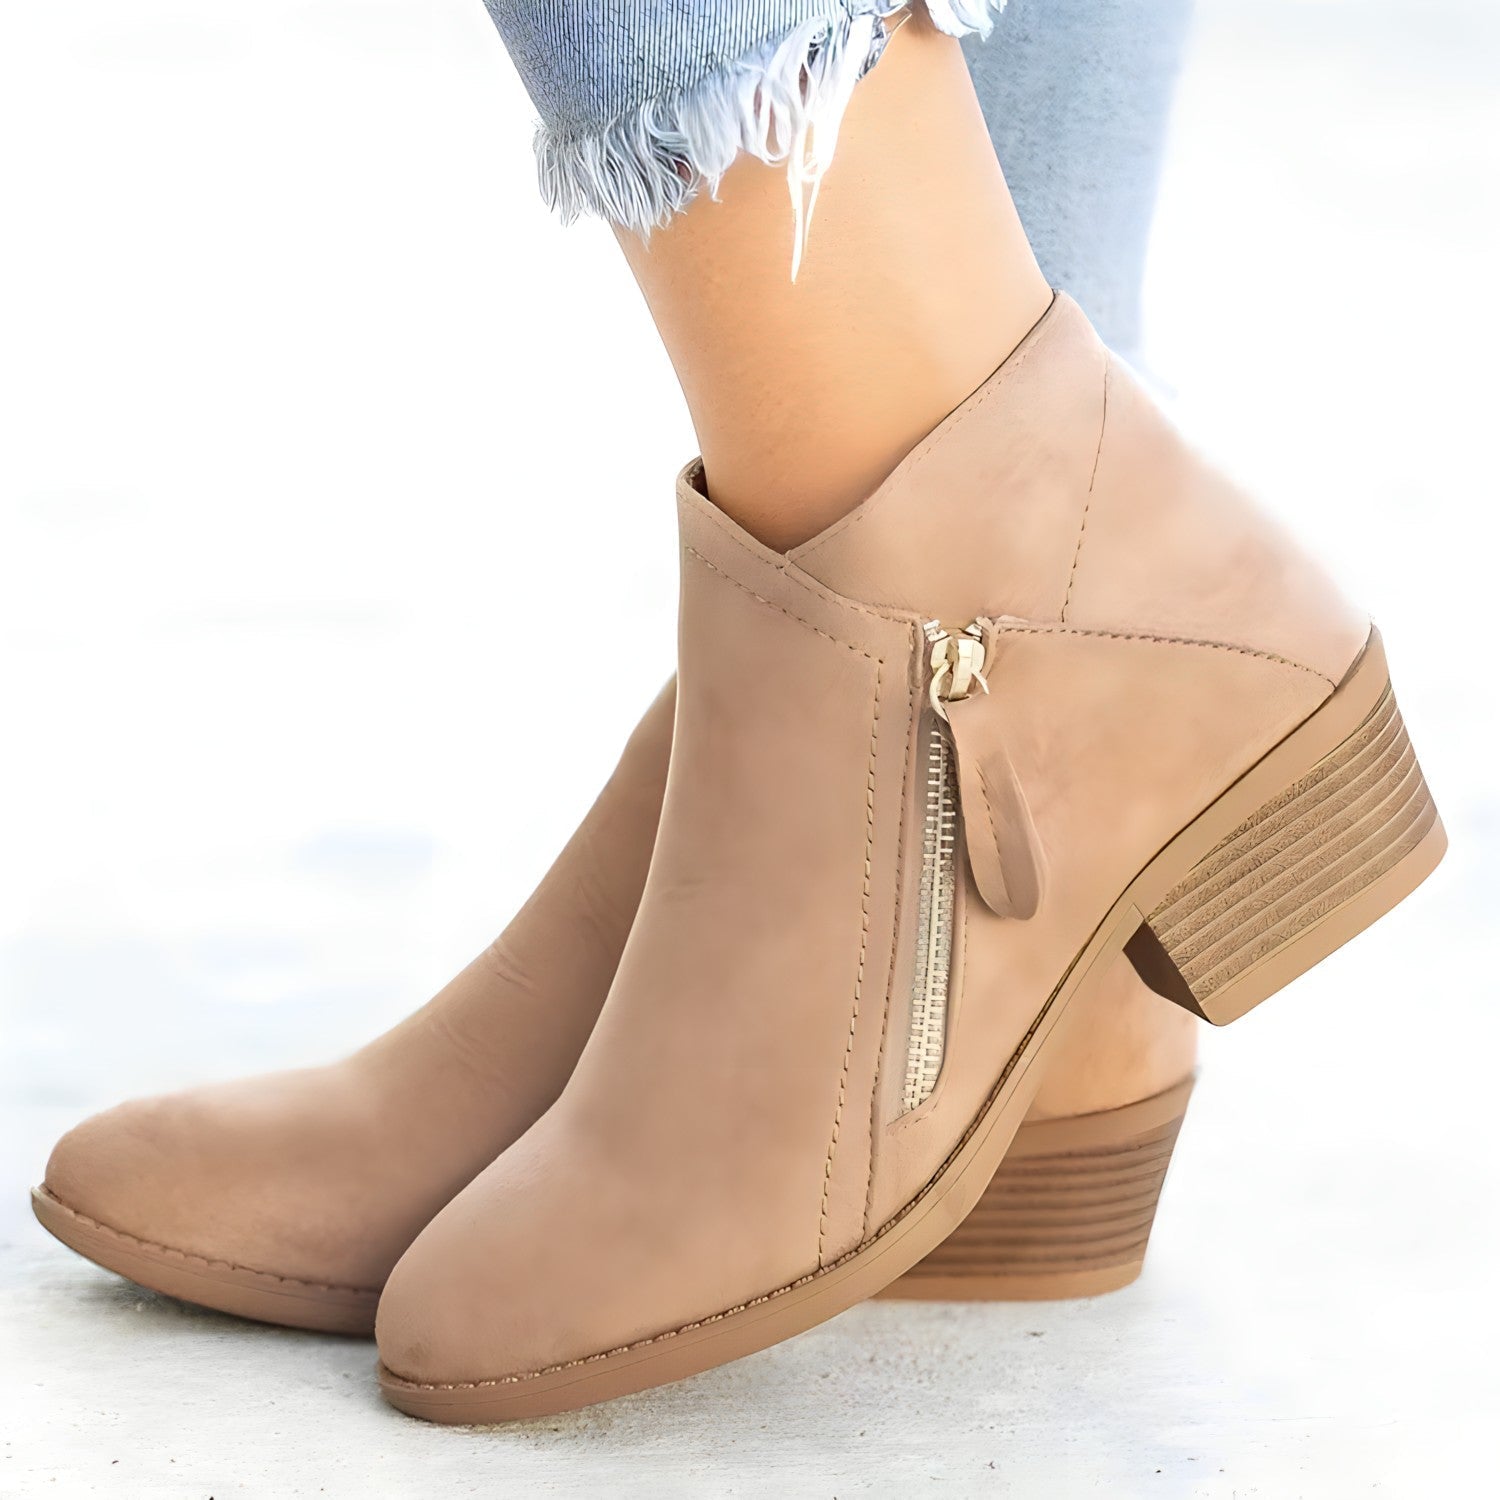 Jewel - Fashionable suede boots